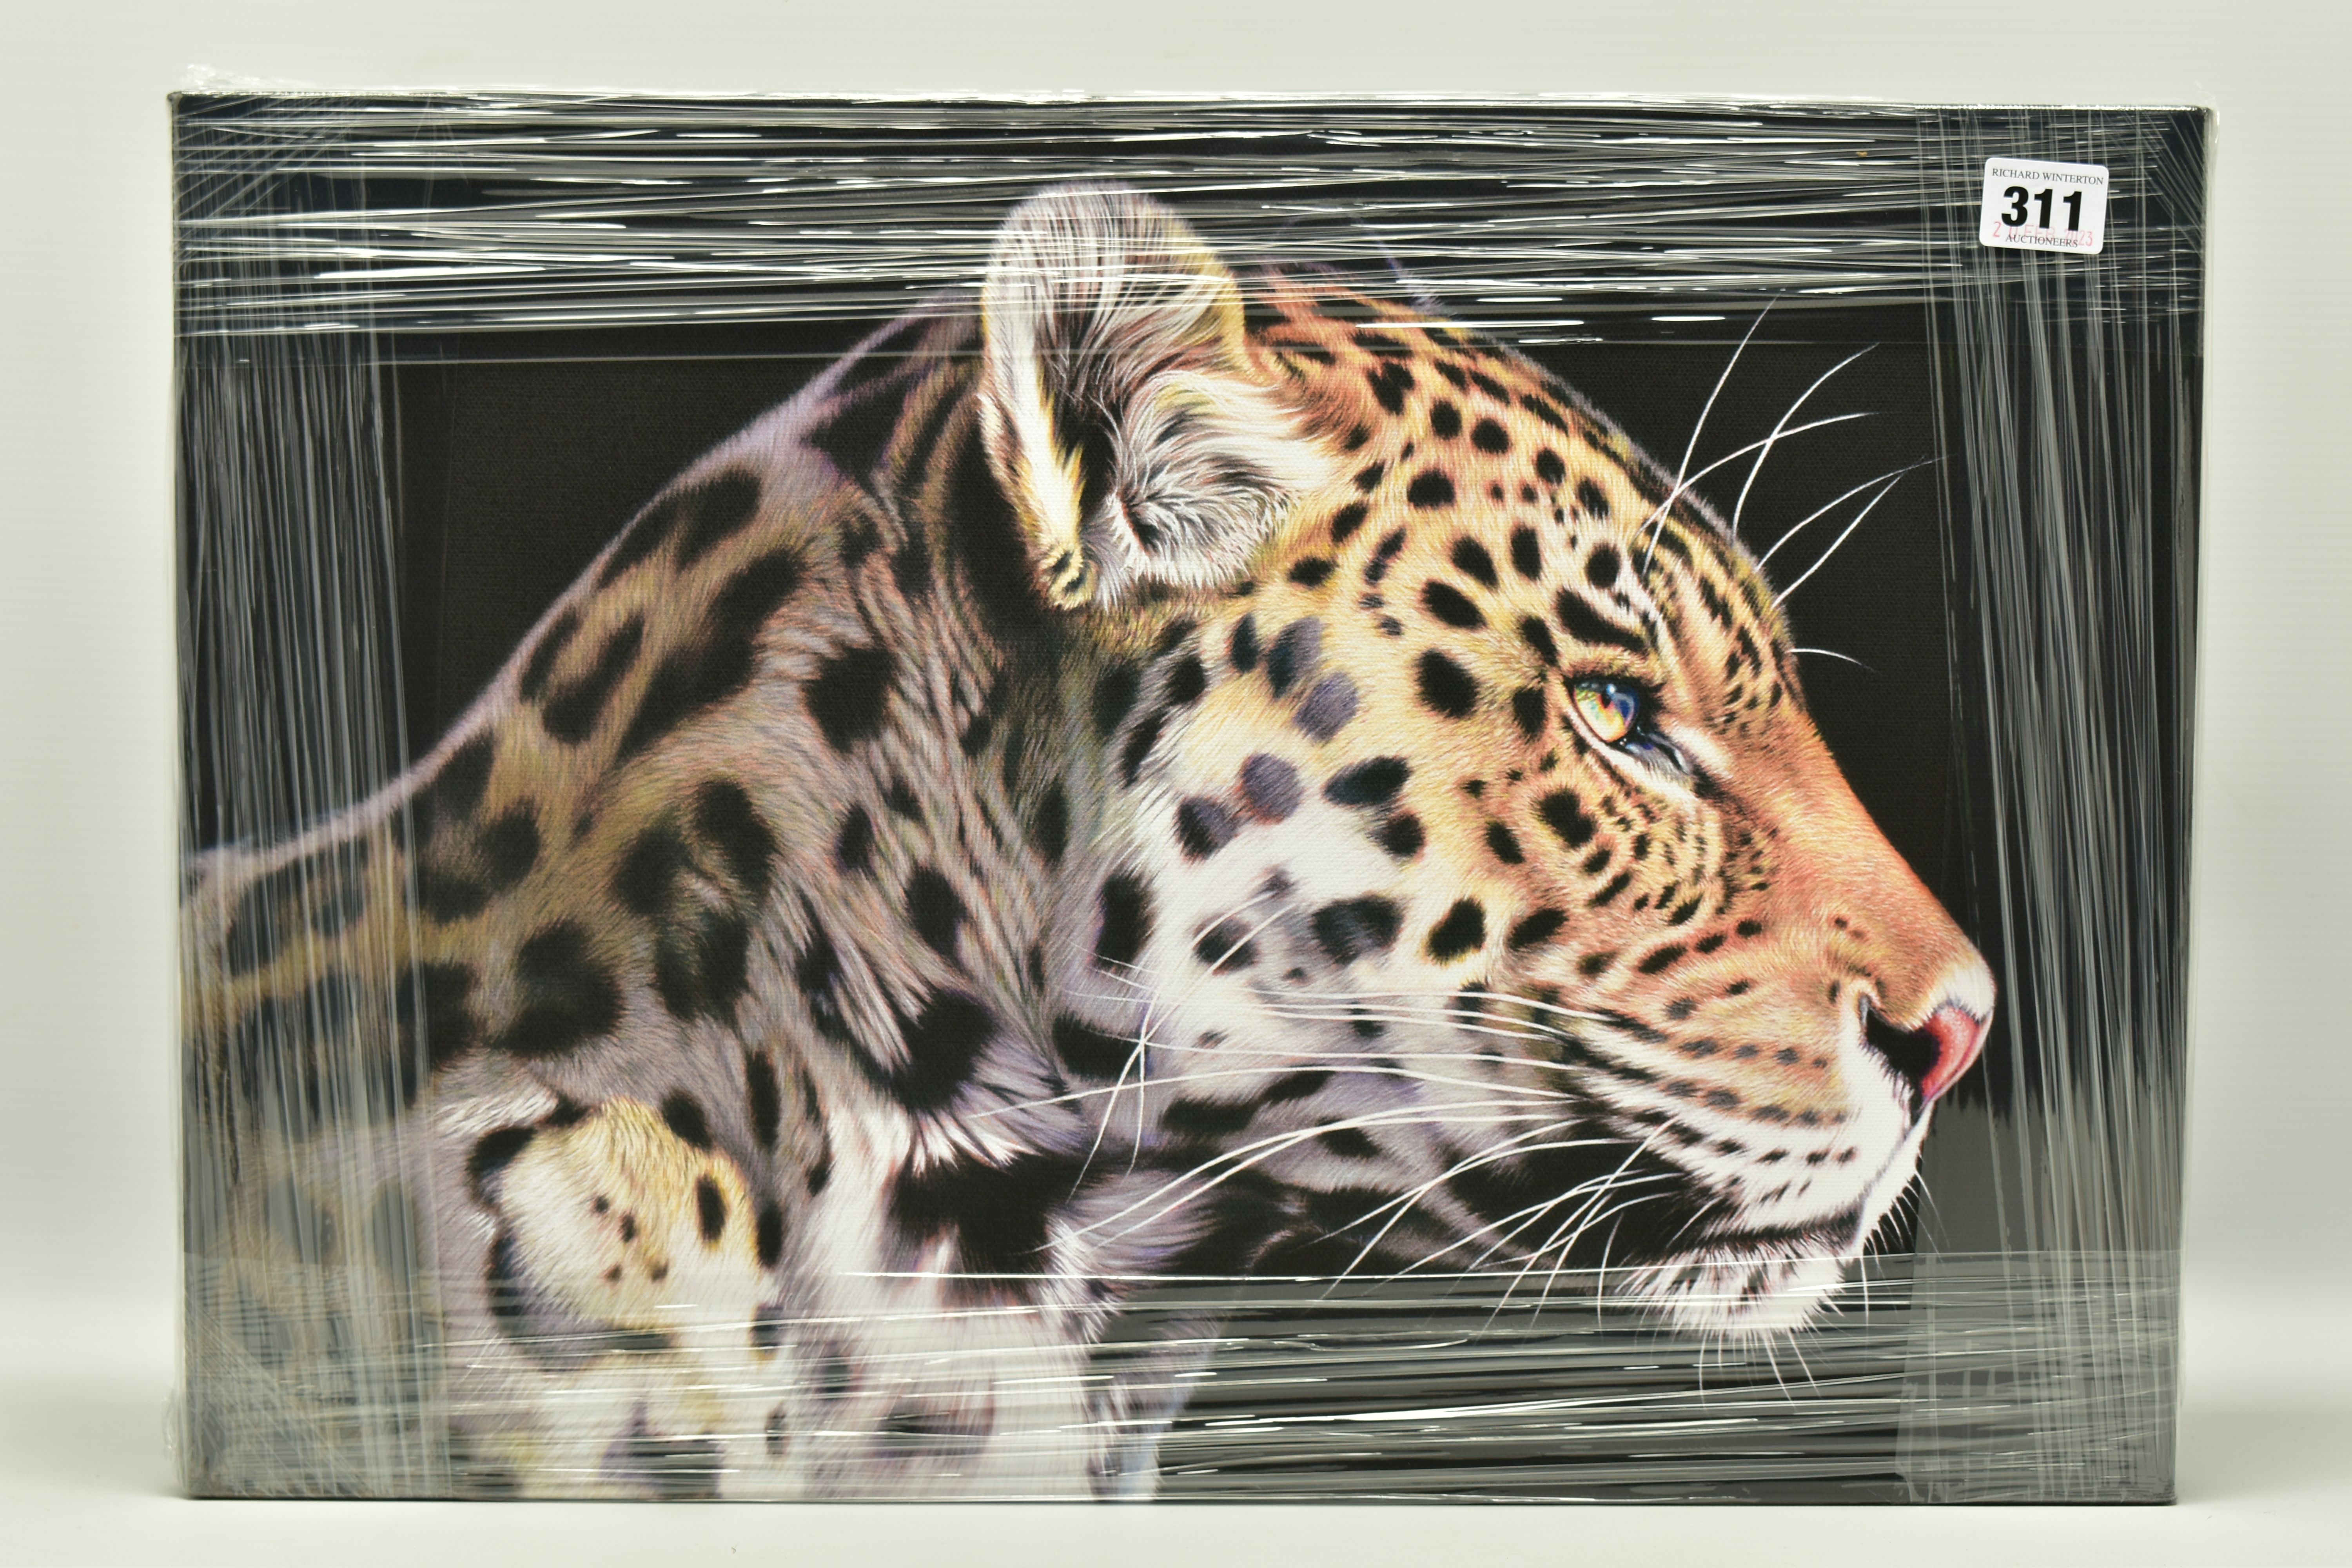 DARRYN EGGLETON (SOUTH AFRICA 1981) 'THE WILD SIDE I', a signed limited edition box canvas print